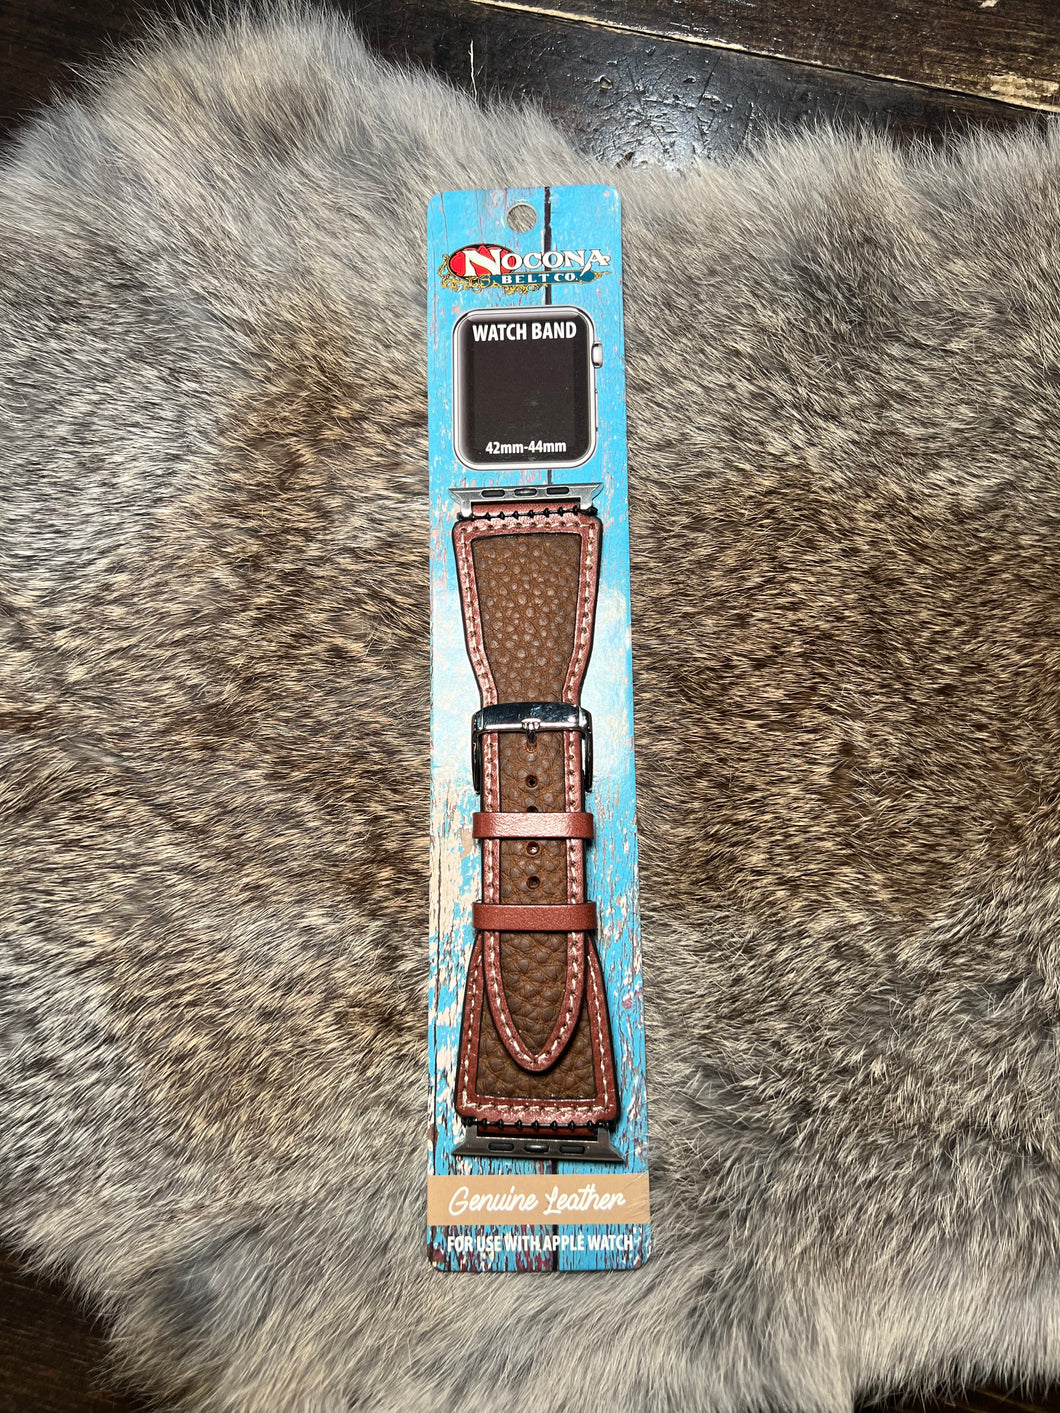 Nocona Watch Band 302 (Large Size 42mm - 44mm)